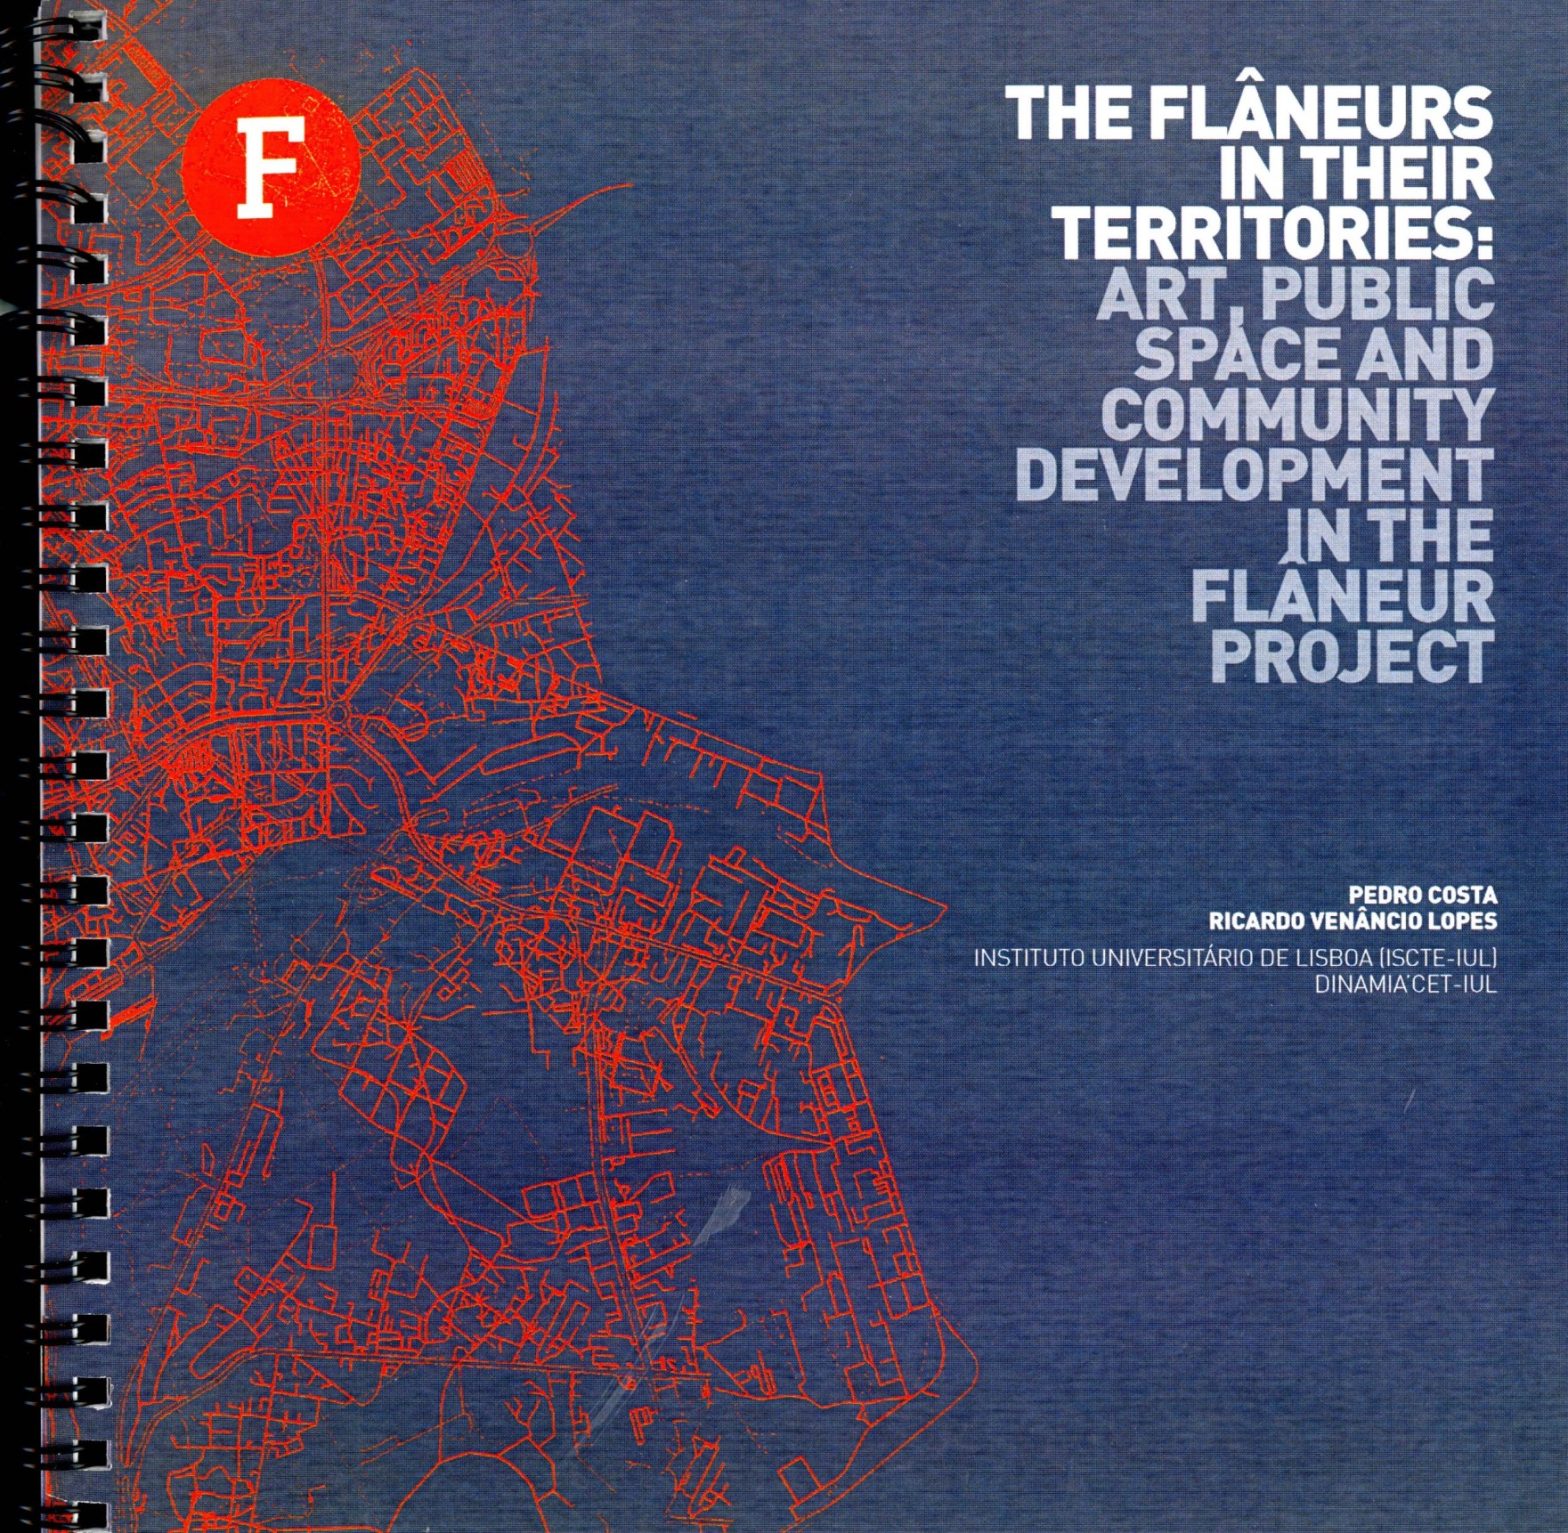 The Flâneur in Their Territories: Art, Public Space and Community Development in the Flâneur Project Pedro Costa and Ricardo Venâncio Lopes